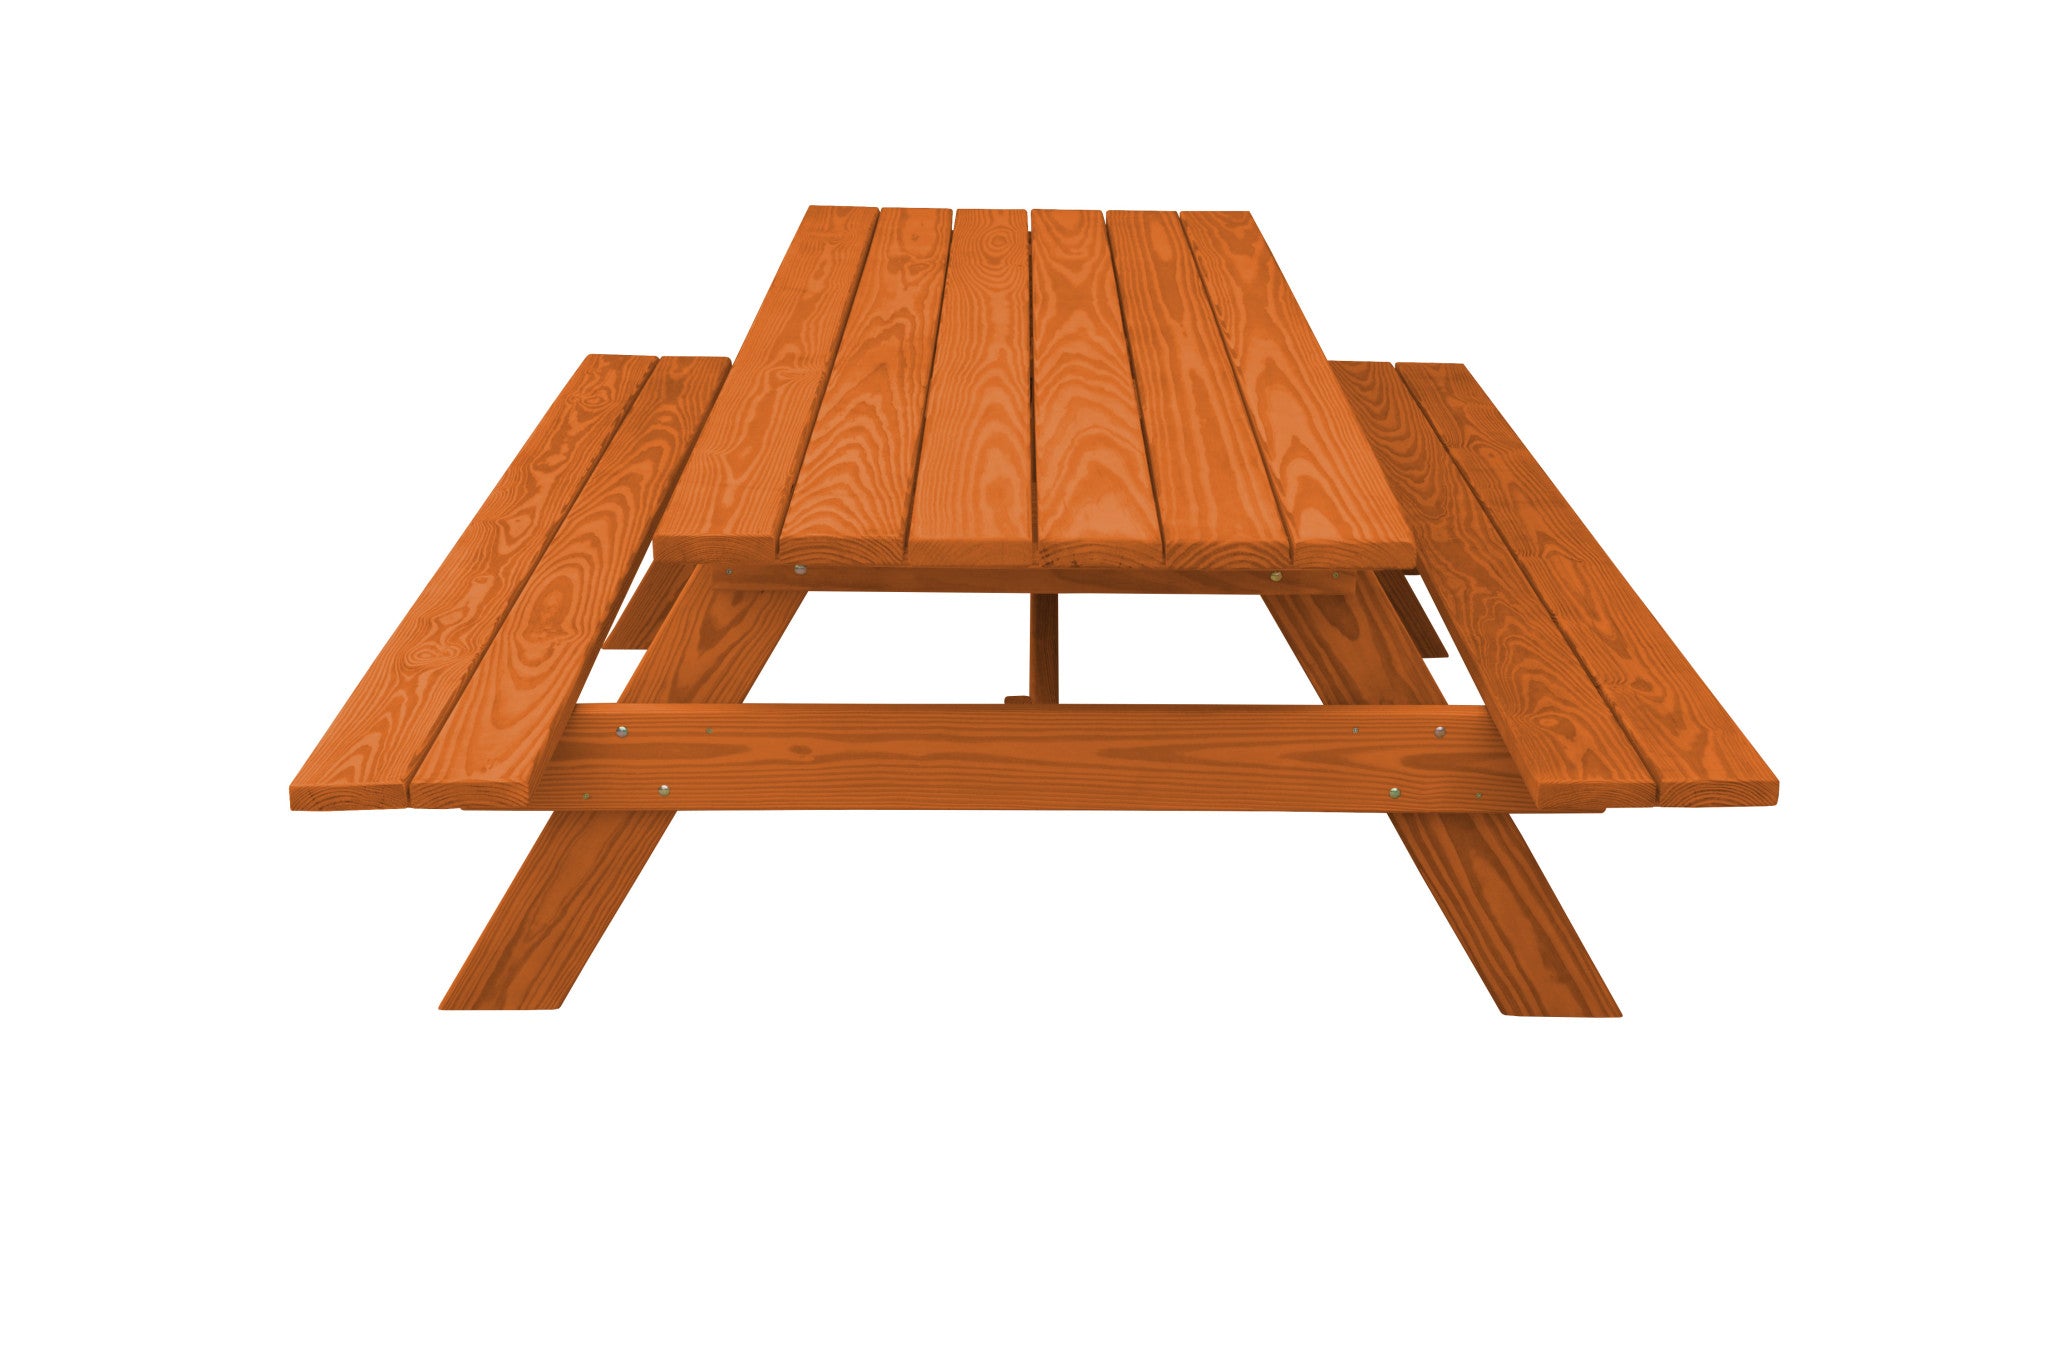 94" Redwood Solid Wood Outdoor Picnic Table